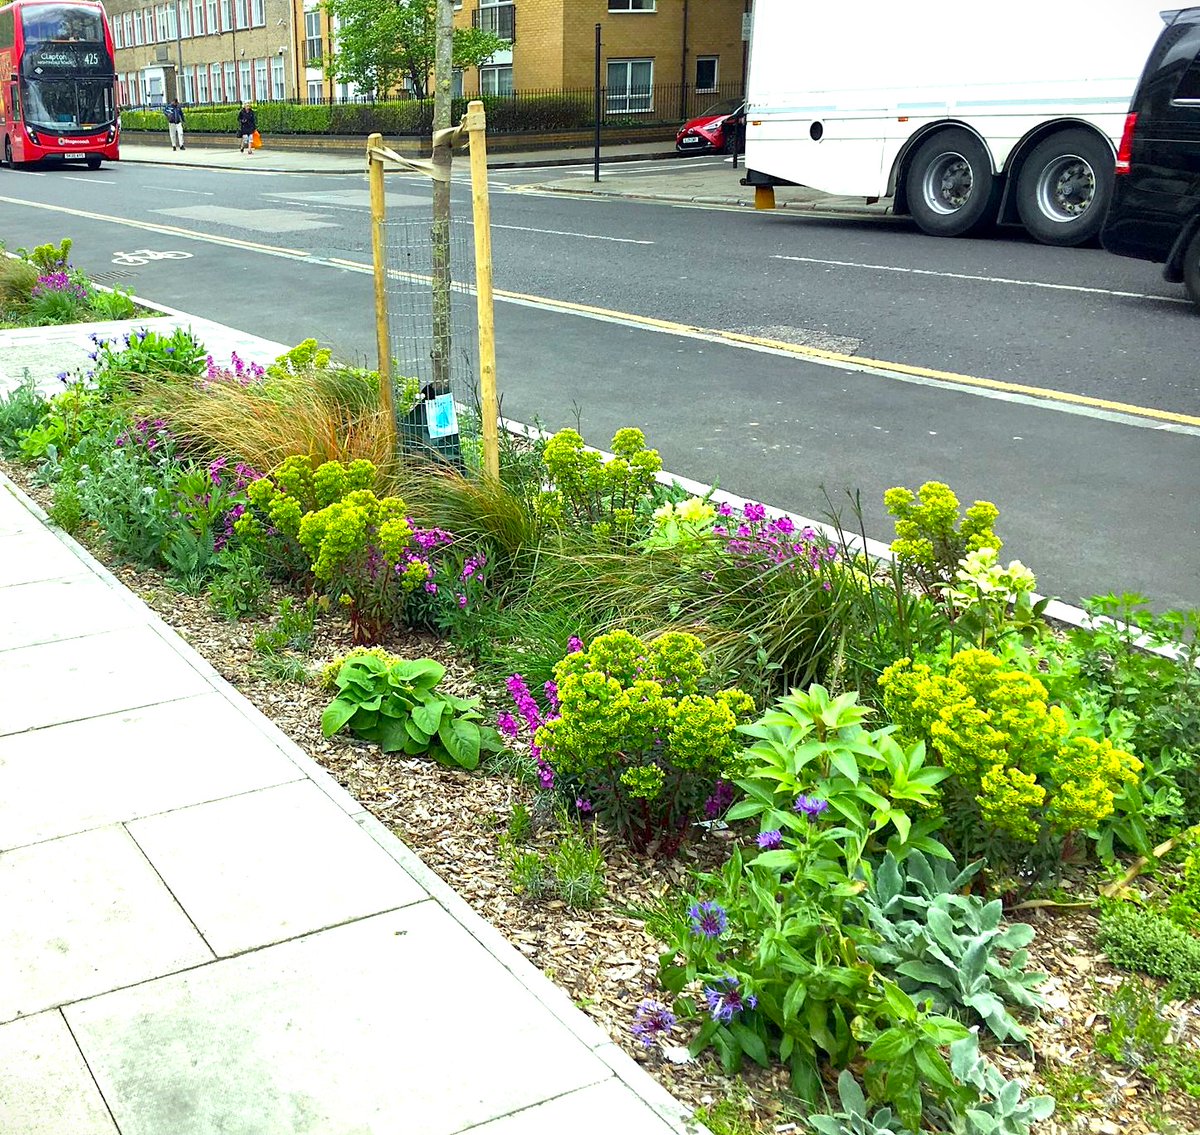 Not just a pretty space: as well as reducing water flow into drains &, thereby, sewage discharge, SuDS can reduce flood risk, road runoff, improve urban cooling. This one includes larval foodplants for butterflies & moths, nectar for bees, hoverflies & ladybirds.